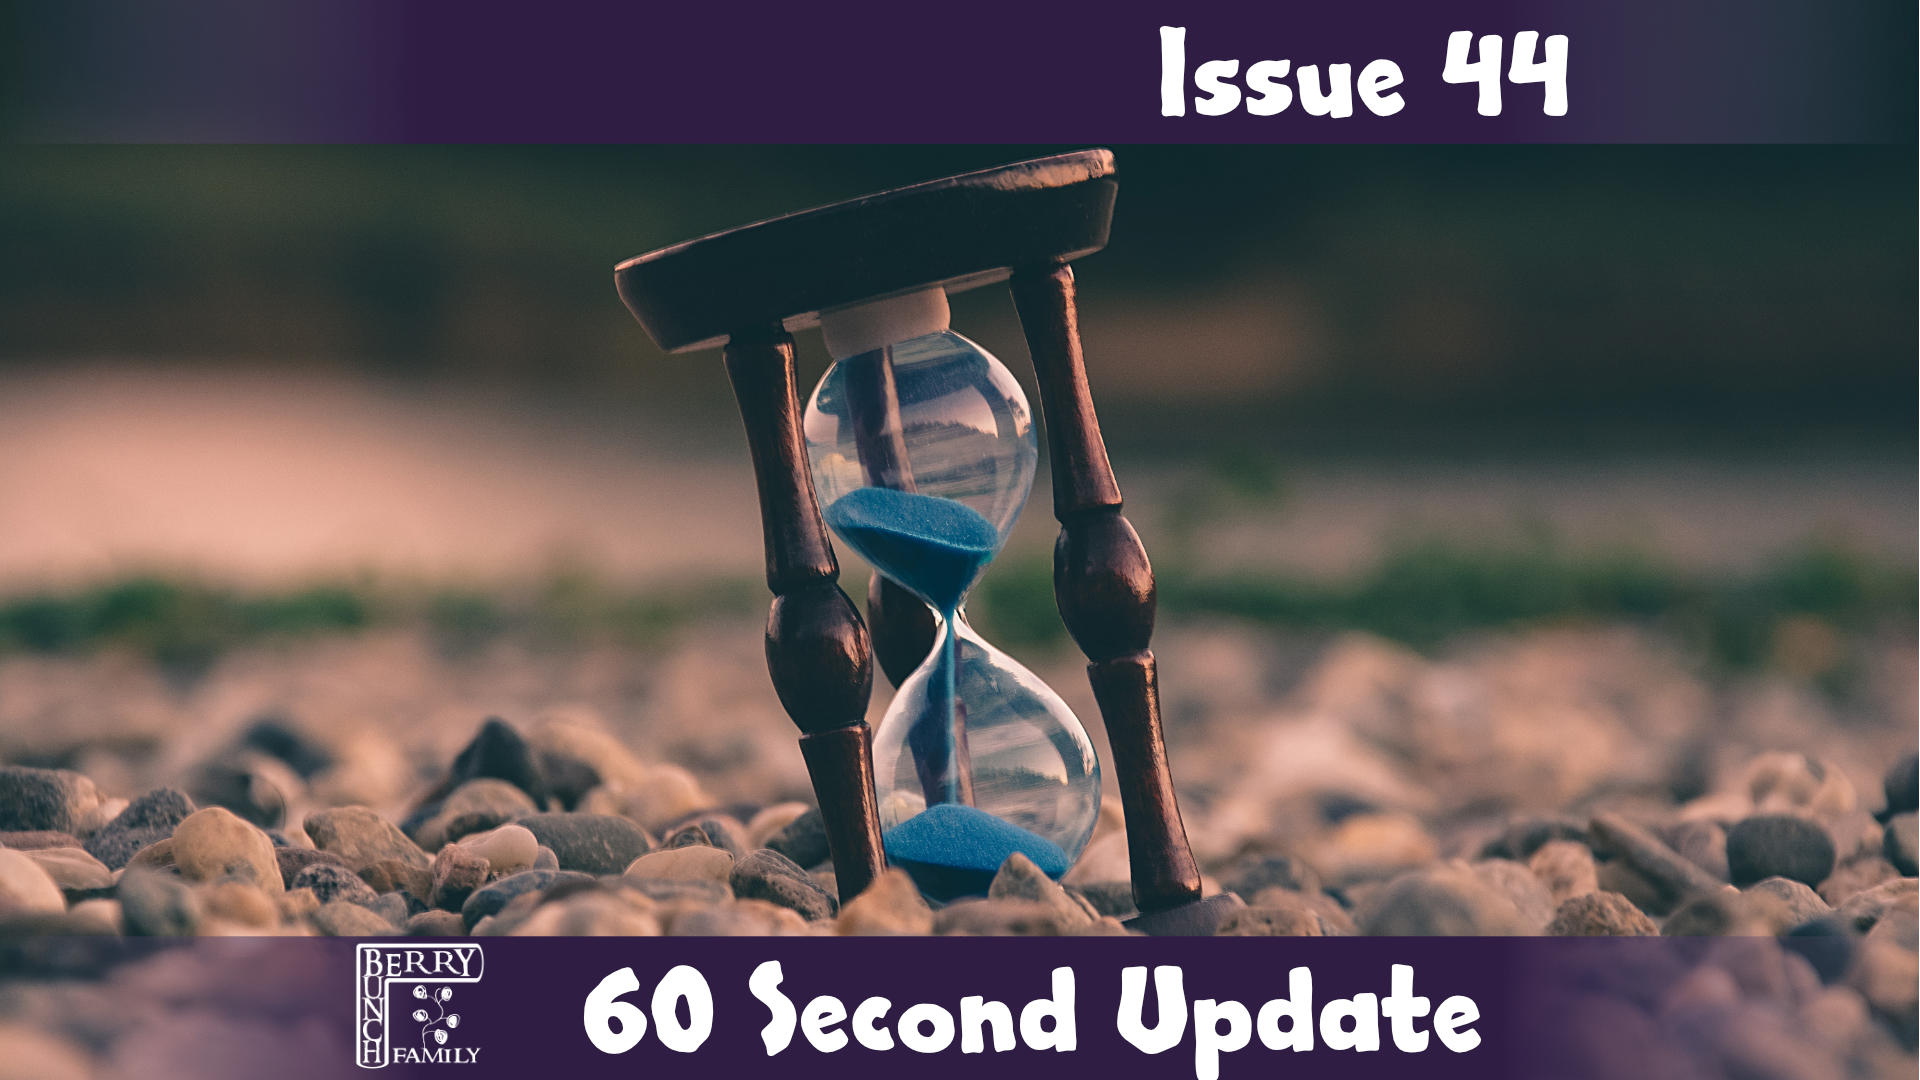 60 Second Update, Issue 44